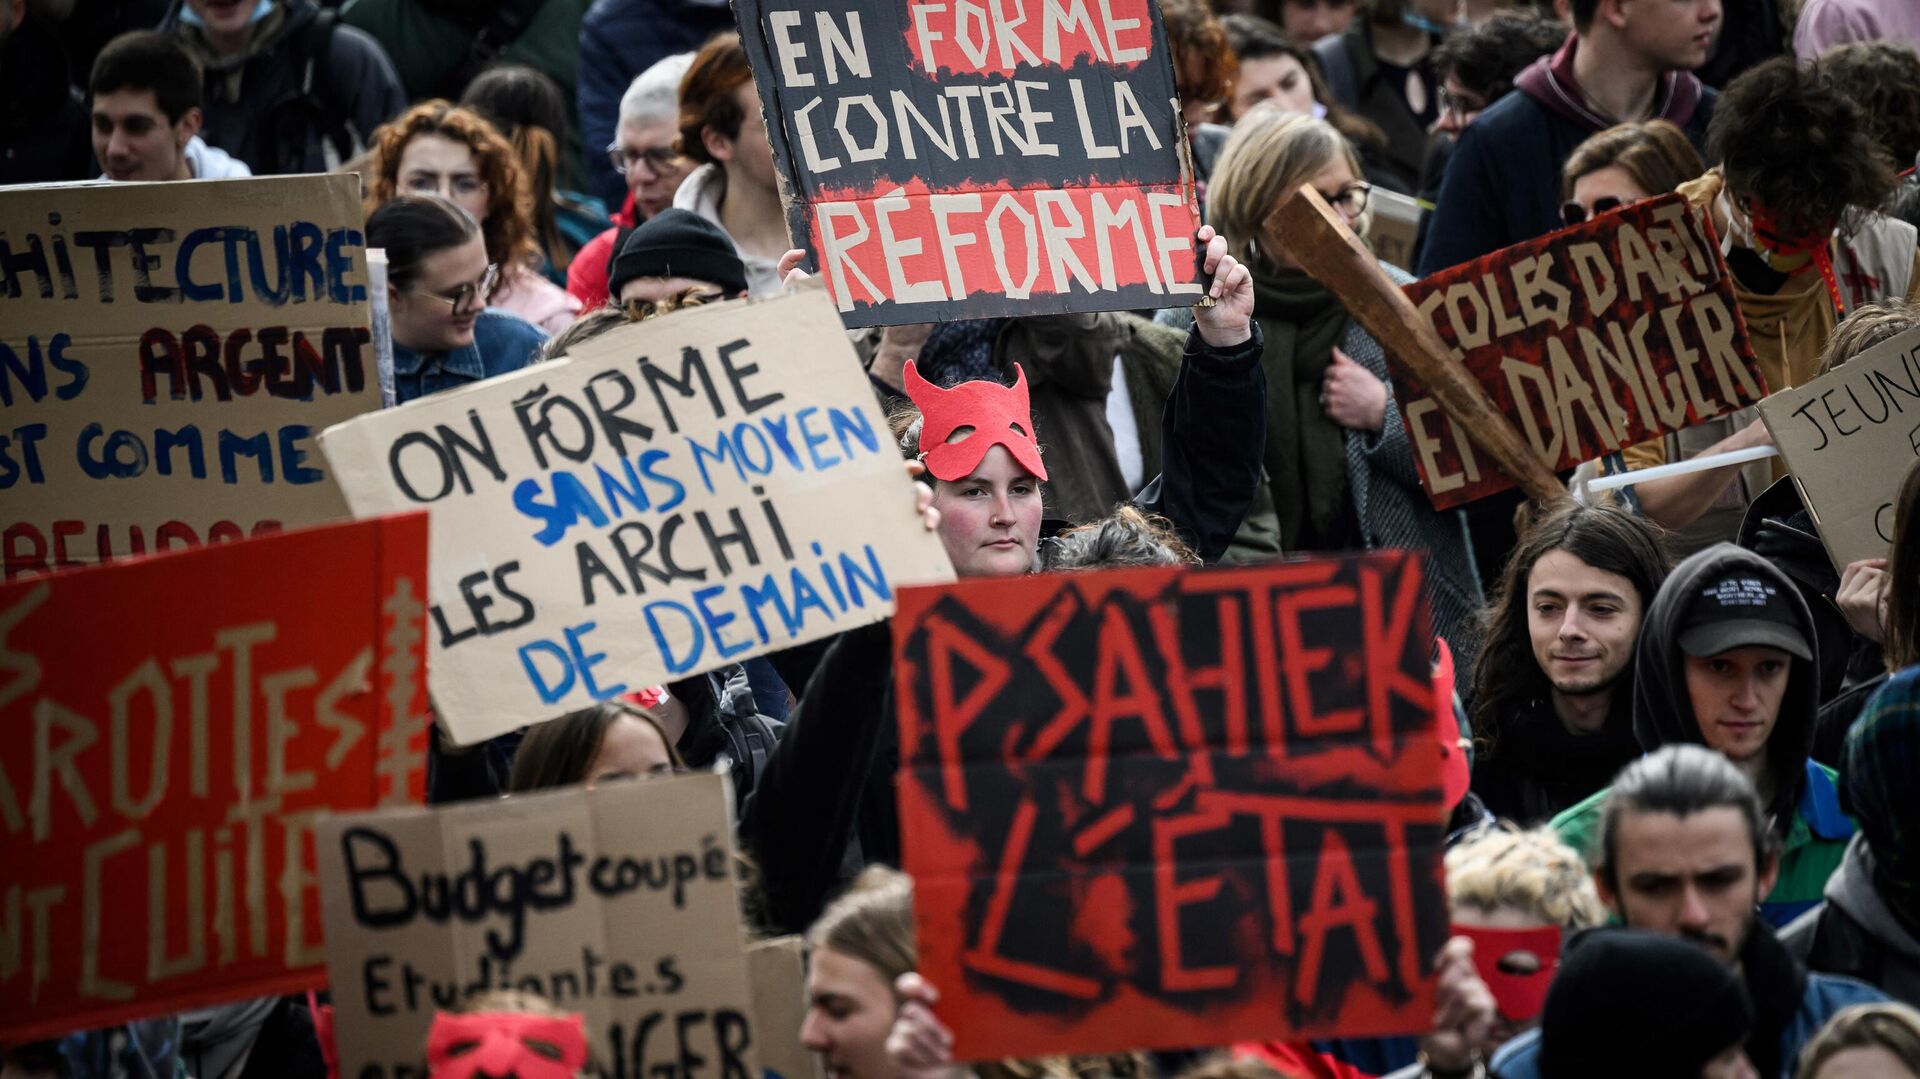 Protestors hold placards during a  demonstration as part of a national day of strikes and protests, a week after the French government pushed a pensions reform through parliament without a vote, using the article 49.3 of the constitution, in Nantes, western France, on March 23, 2023 - Sputnik International, 1920, 26.03.2023